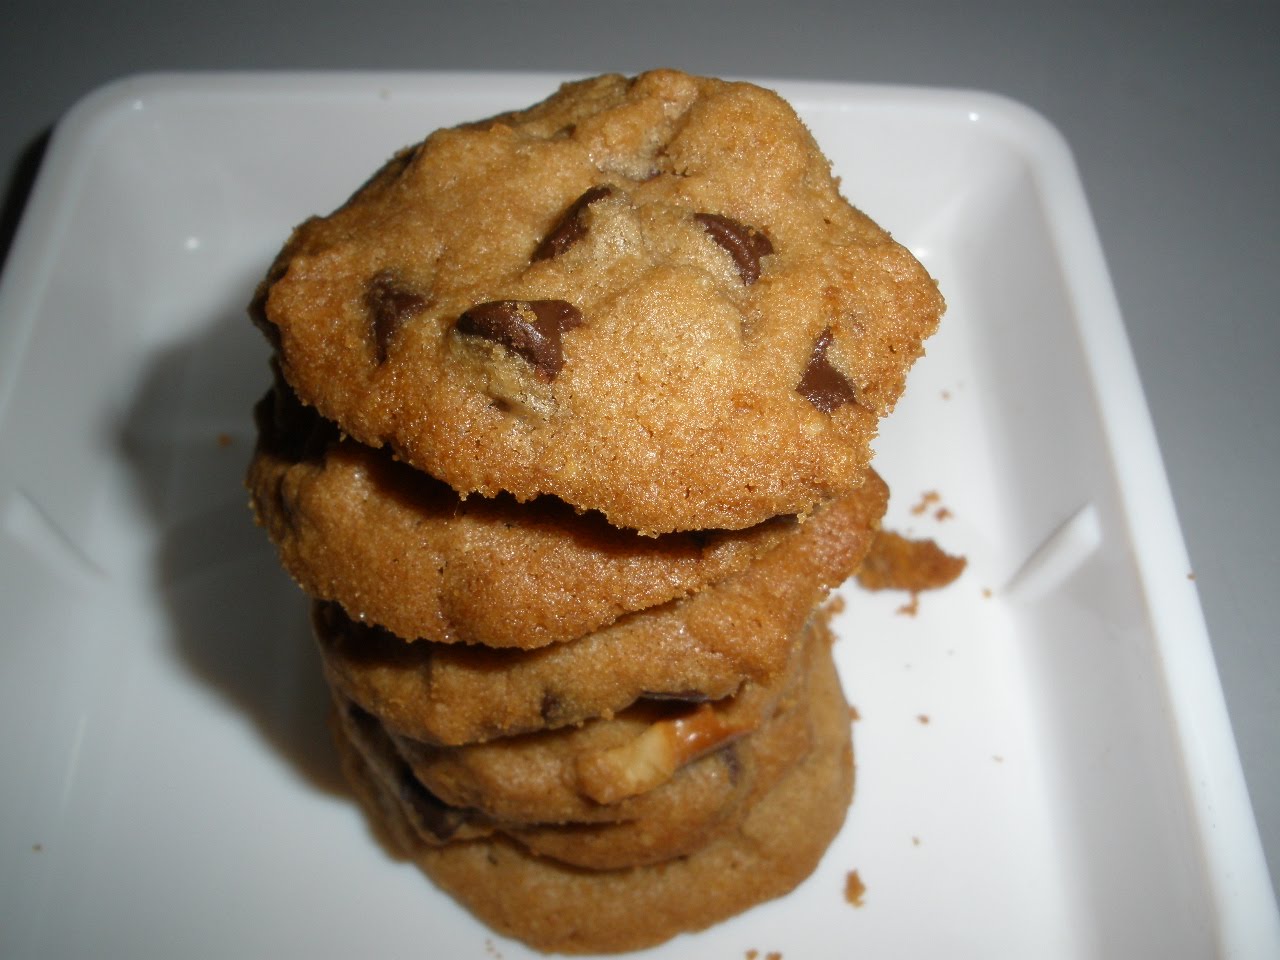 Resepi chocolate chip cookies famous amos